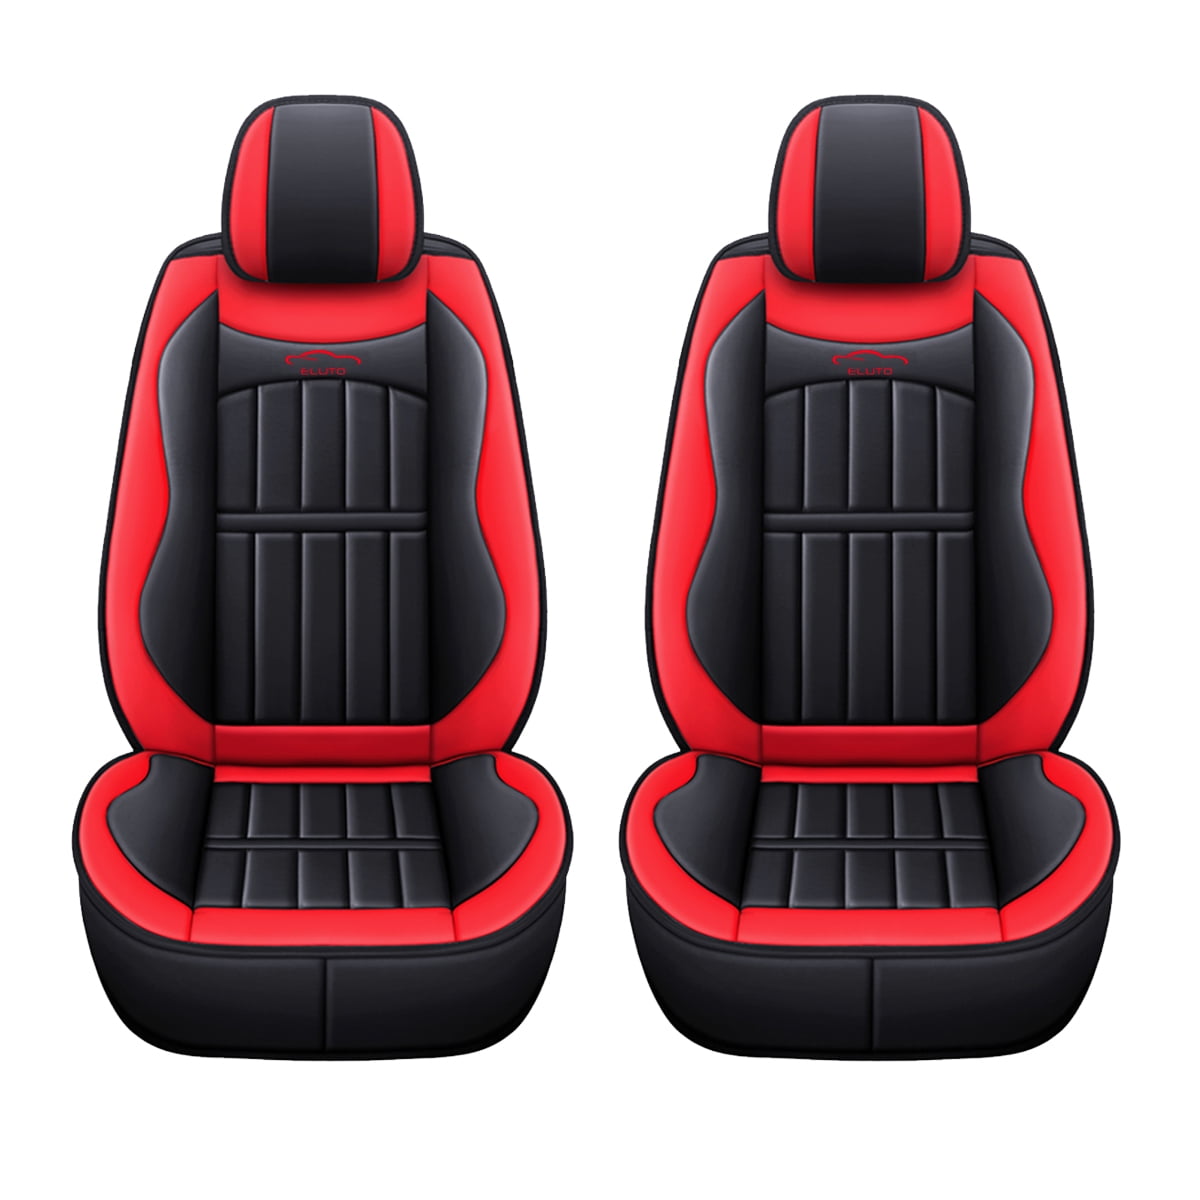 Coverado Auto Seat Covers Set Black and Red Trim, 5 Seats Car Seat Covers  Full Set, Breathable Faux Leather Universal Seat Protectors Cushions, Auto Interior  Accessories Fit Most Sedan SUVs Trucks 